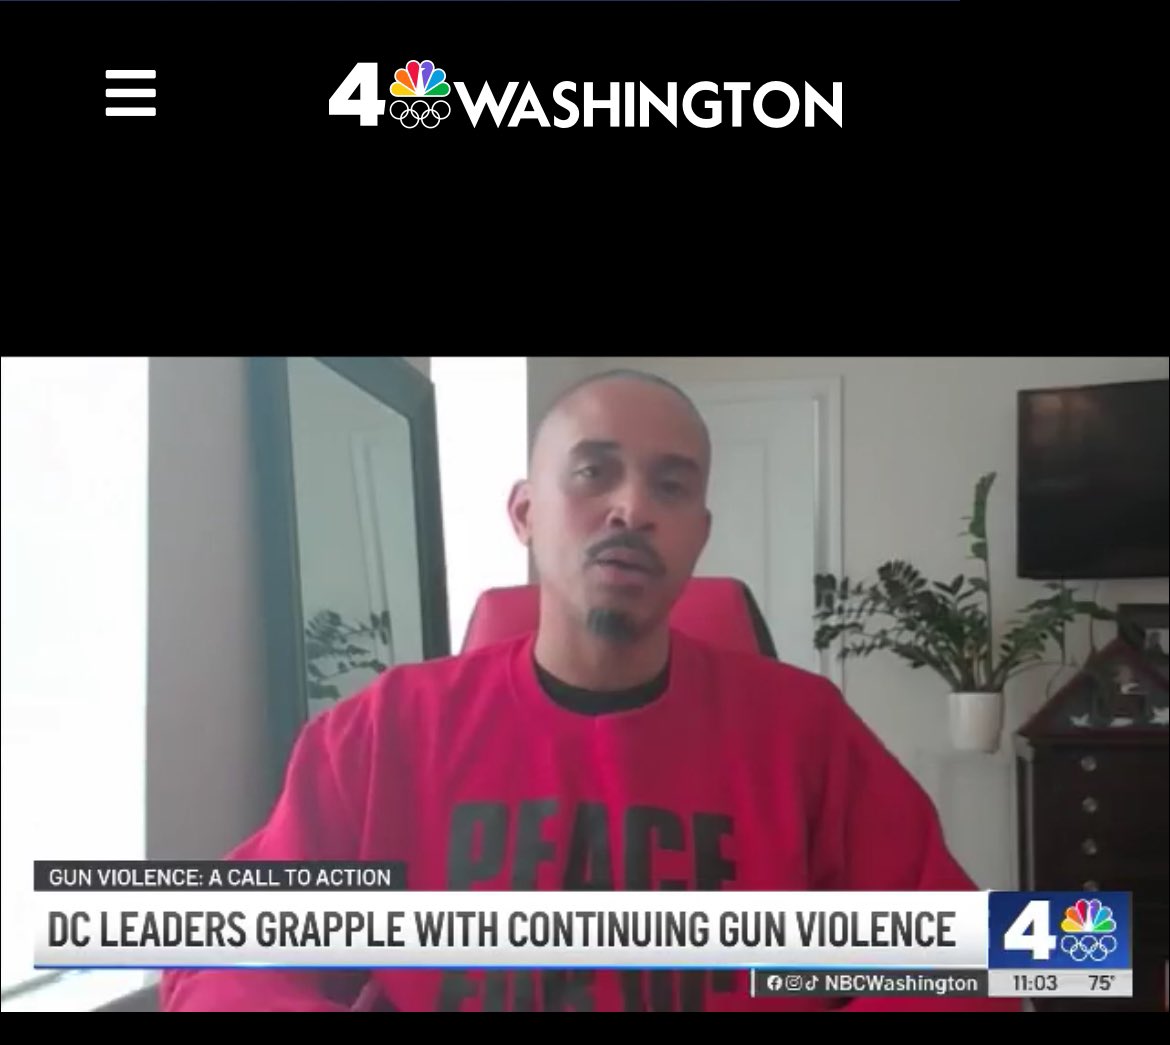 While it’s understandable to feel hopeless or angry. We cannot become stuck in our fear & anger. We must take action- and there are proven strategies to end the violence. Follow this page for updates after tonight’s event. @Marcus_T_Ellis @nbcwashington nbcwashington.com/news/local/ant…